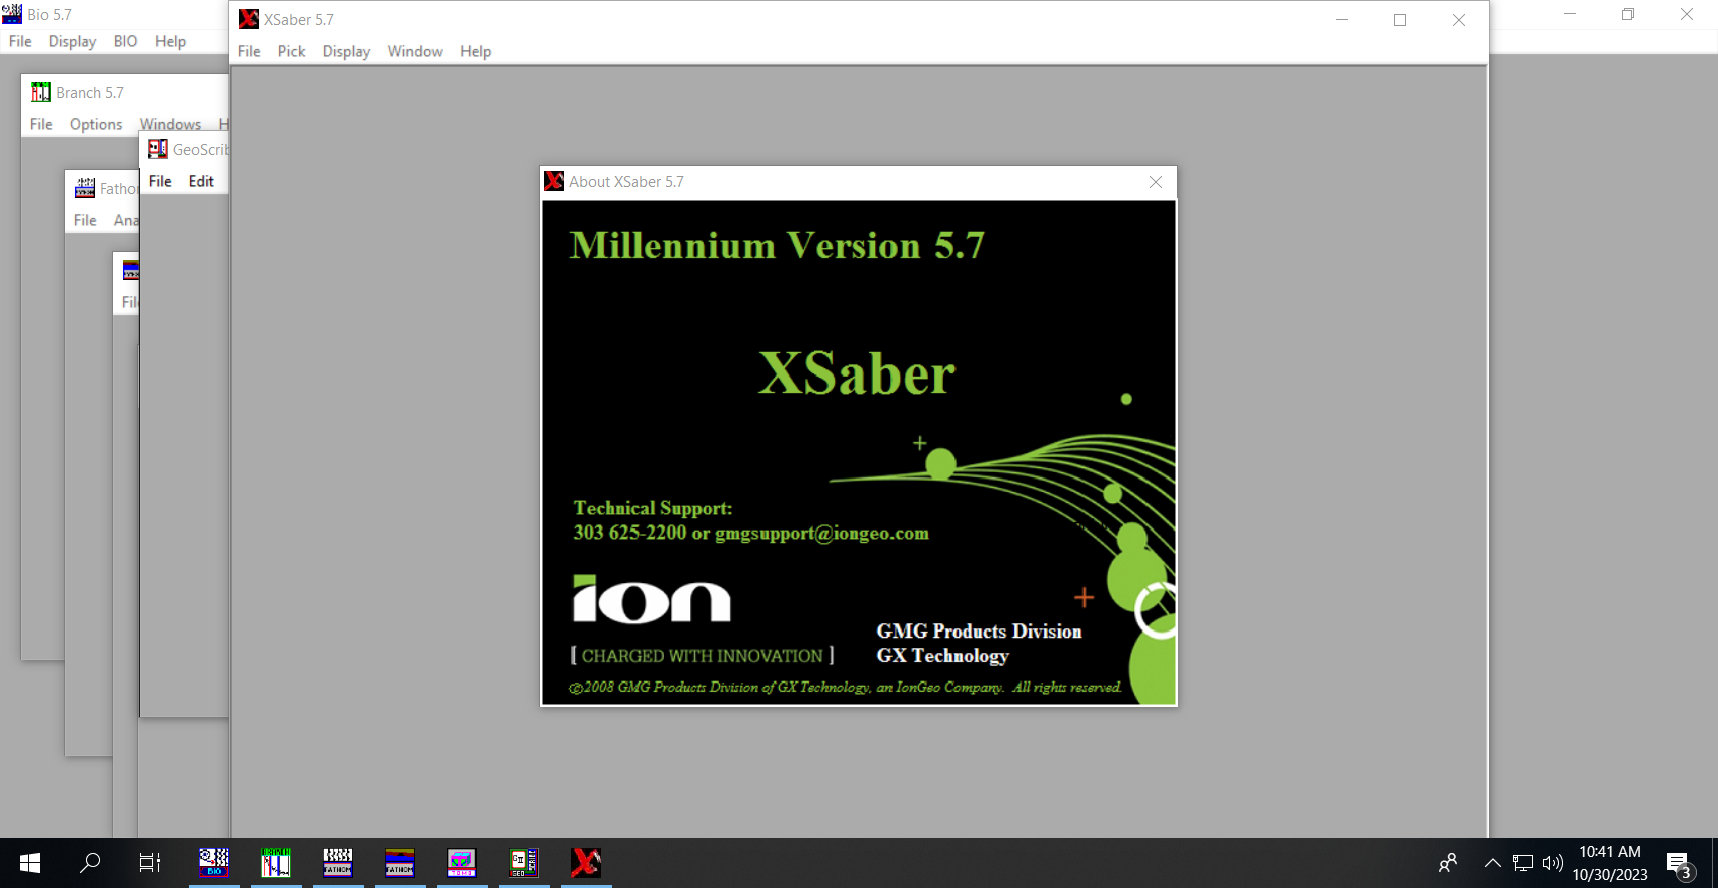 Working with Millennium 5.7 full license